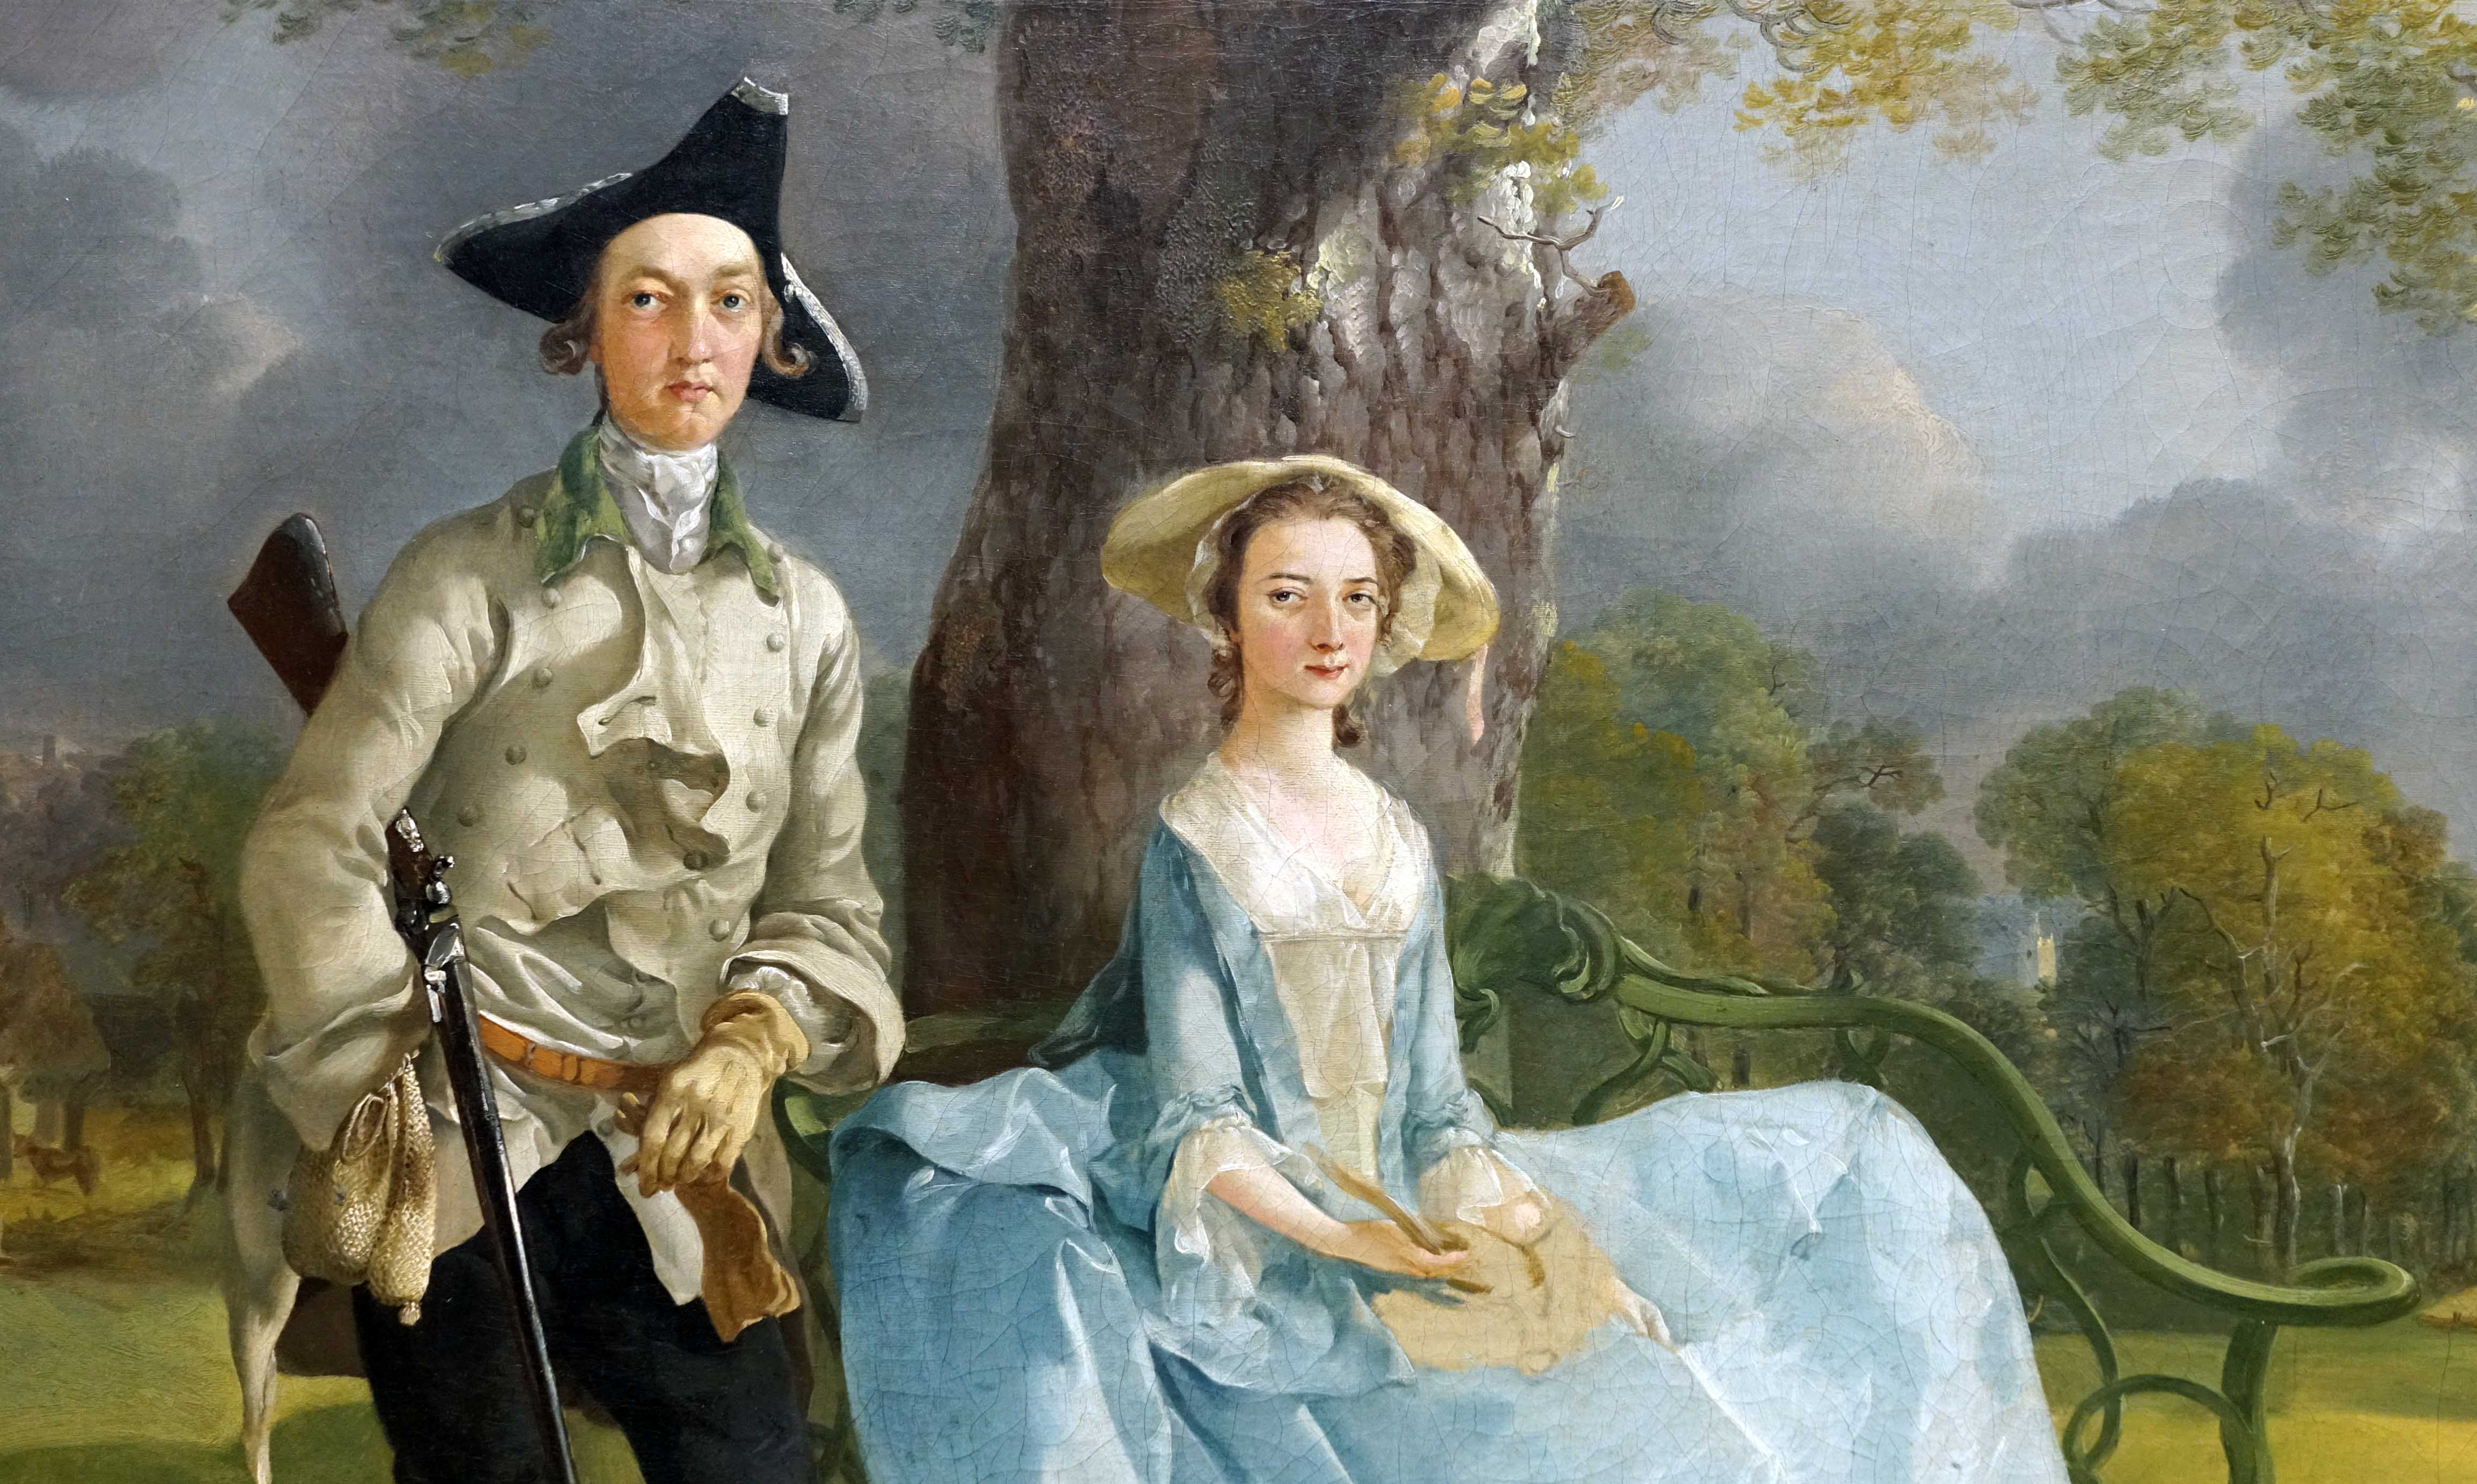 Thomas Gainsborough, Mr. and Mrs. Andrews, c. 1750, oil on canvas, 69.8 x 119.4 cm (The National Gallery, London)